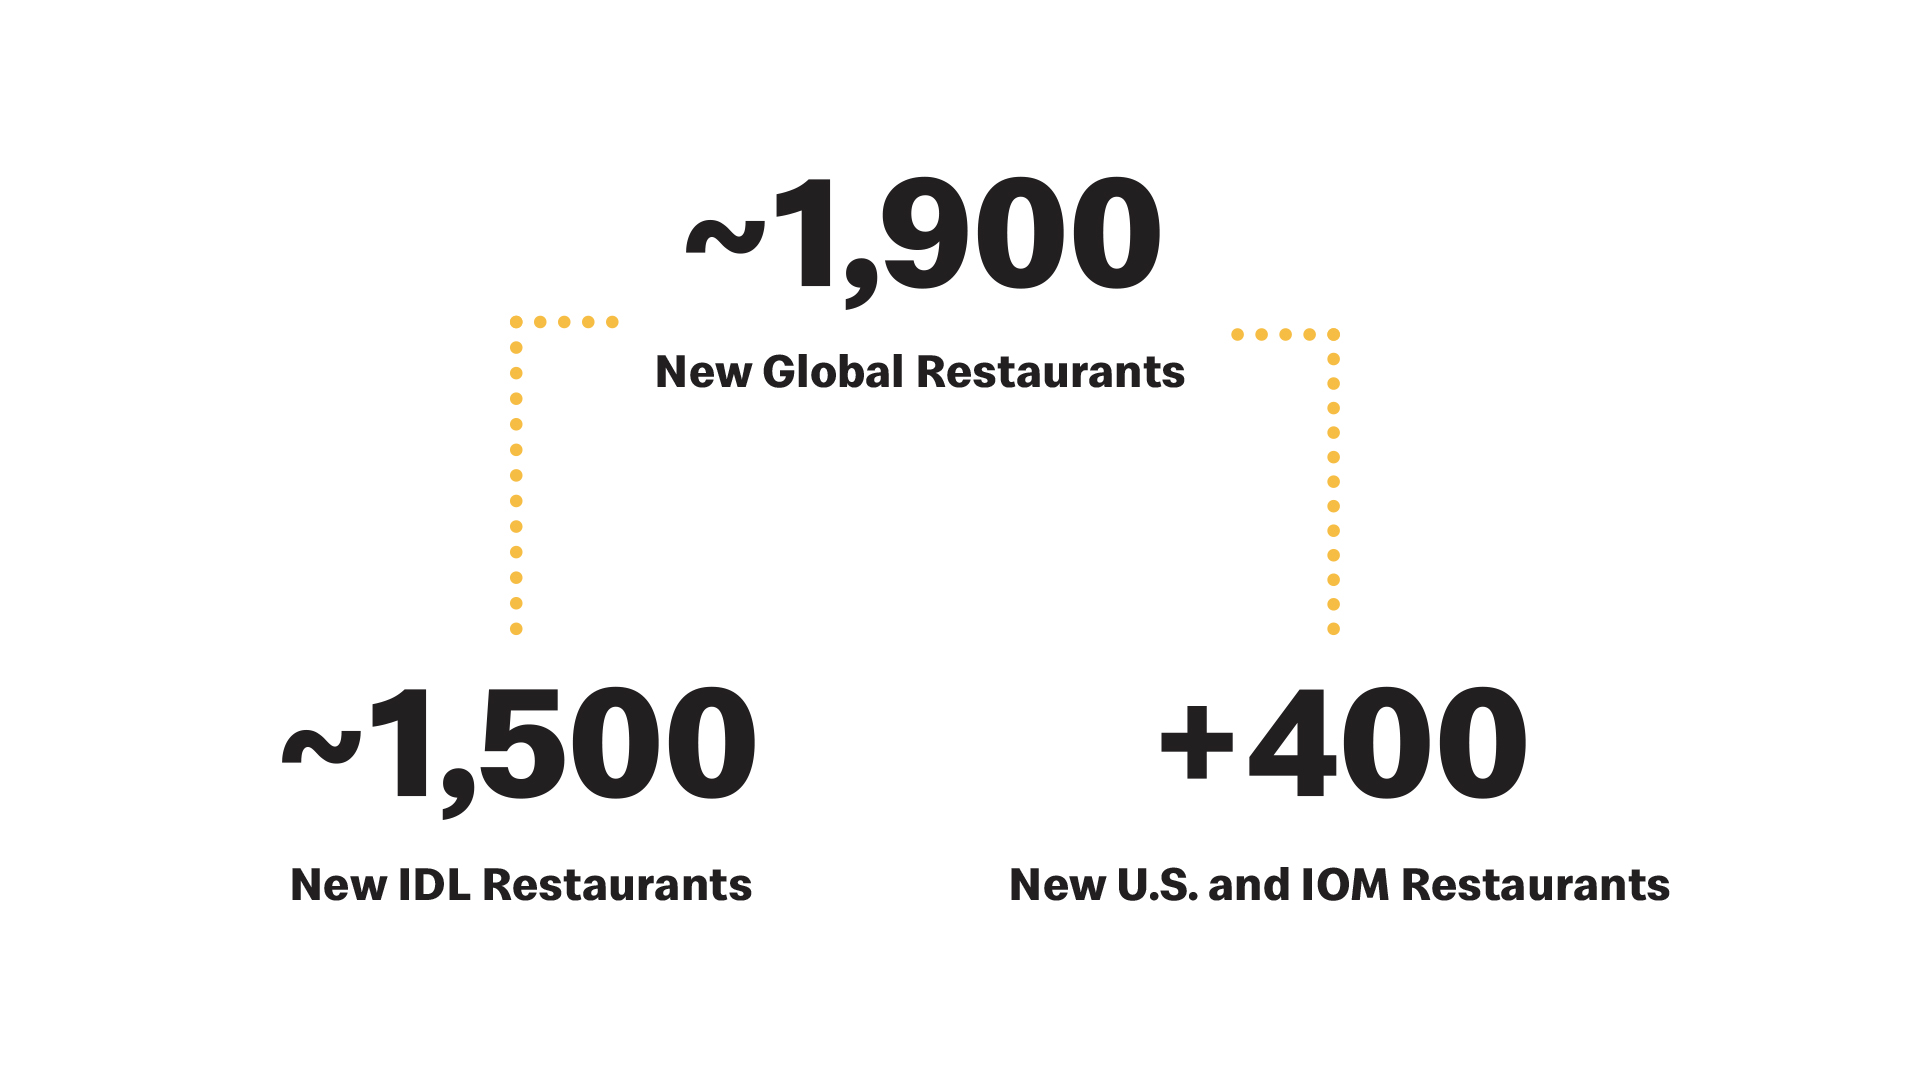 Graphic with text indicating that McDonald's plans on ~1,900 new global restaurants; ~1,500 of them new IDL; ~400 new U.S. and IOM